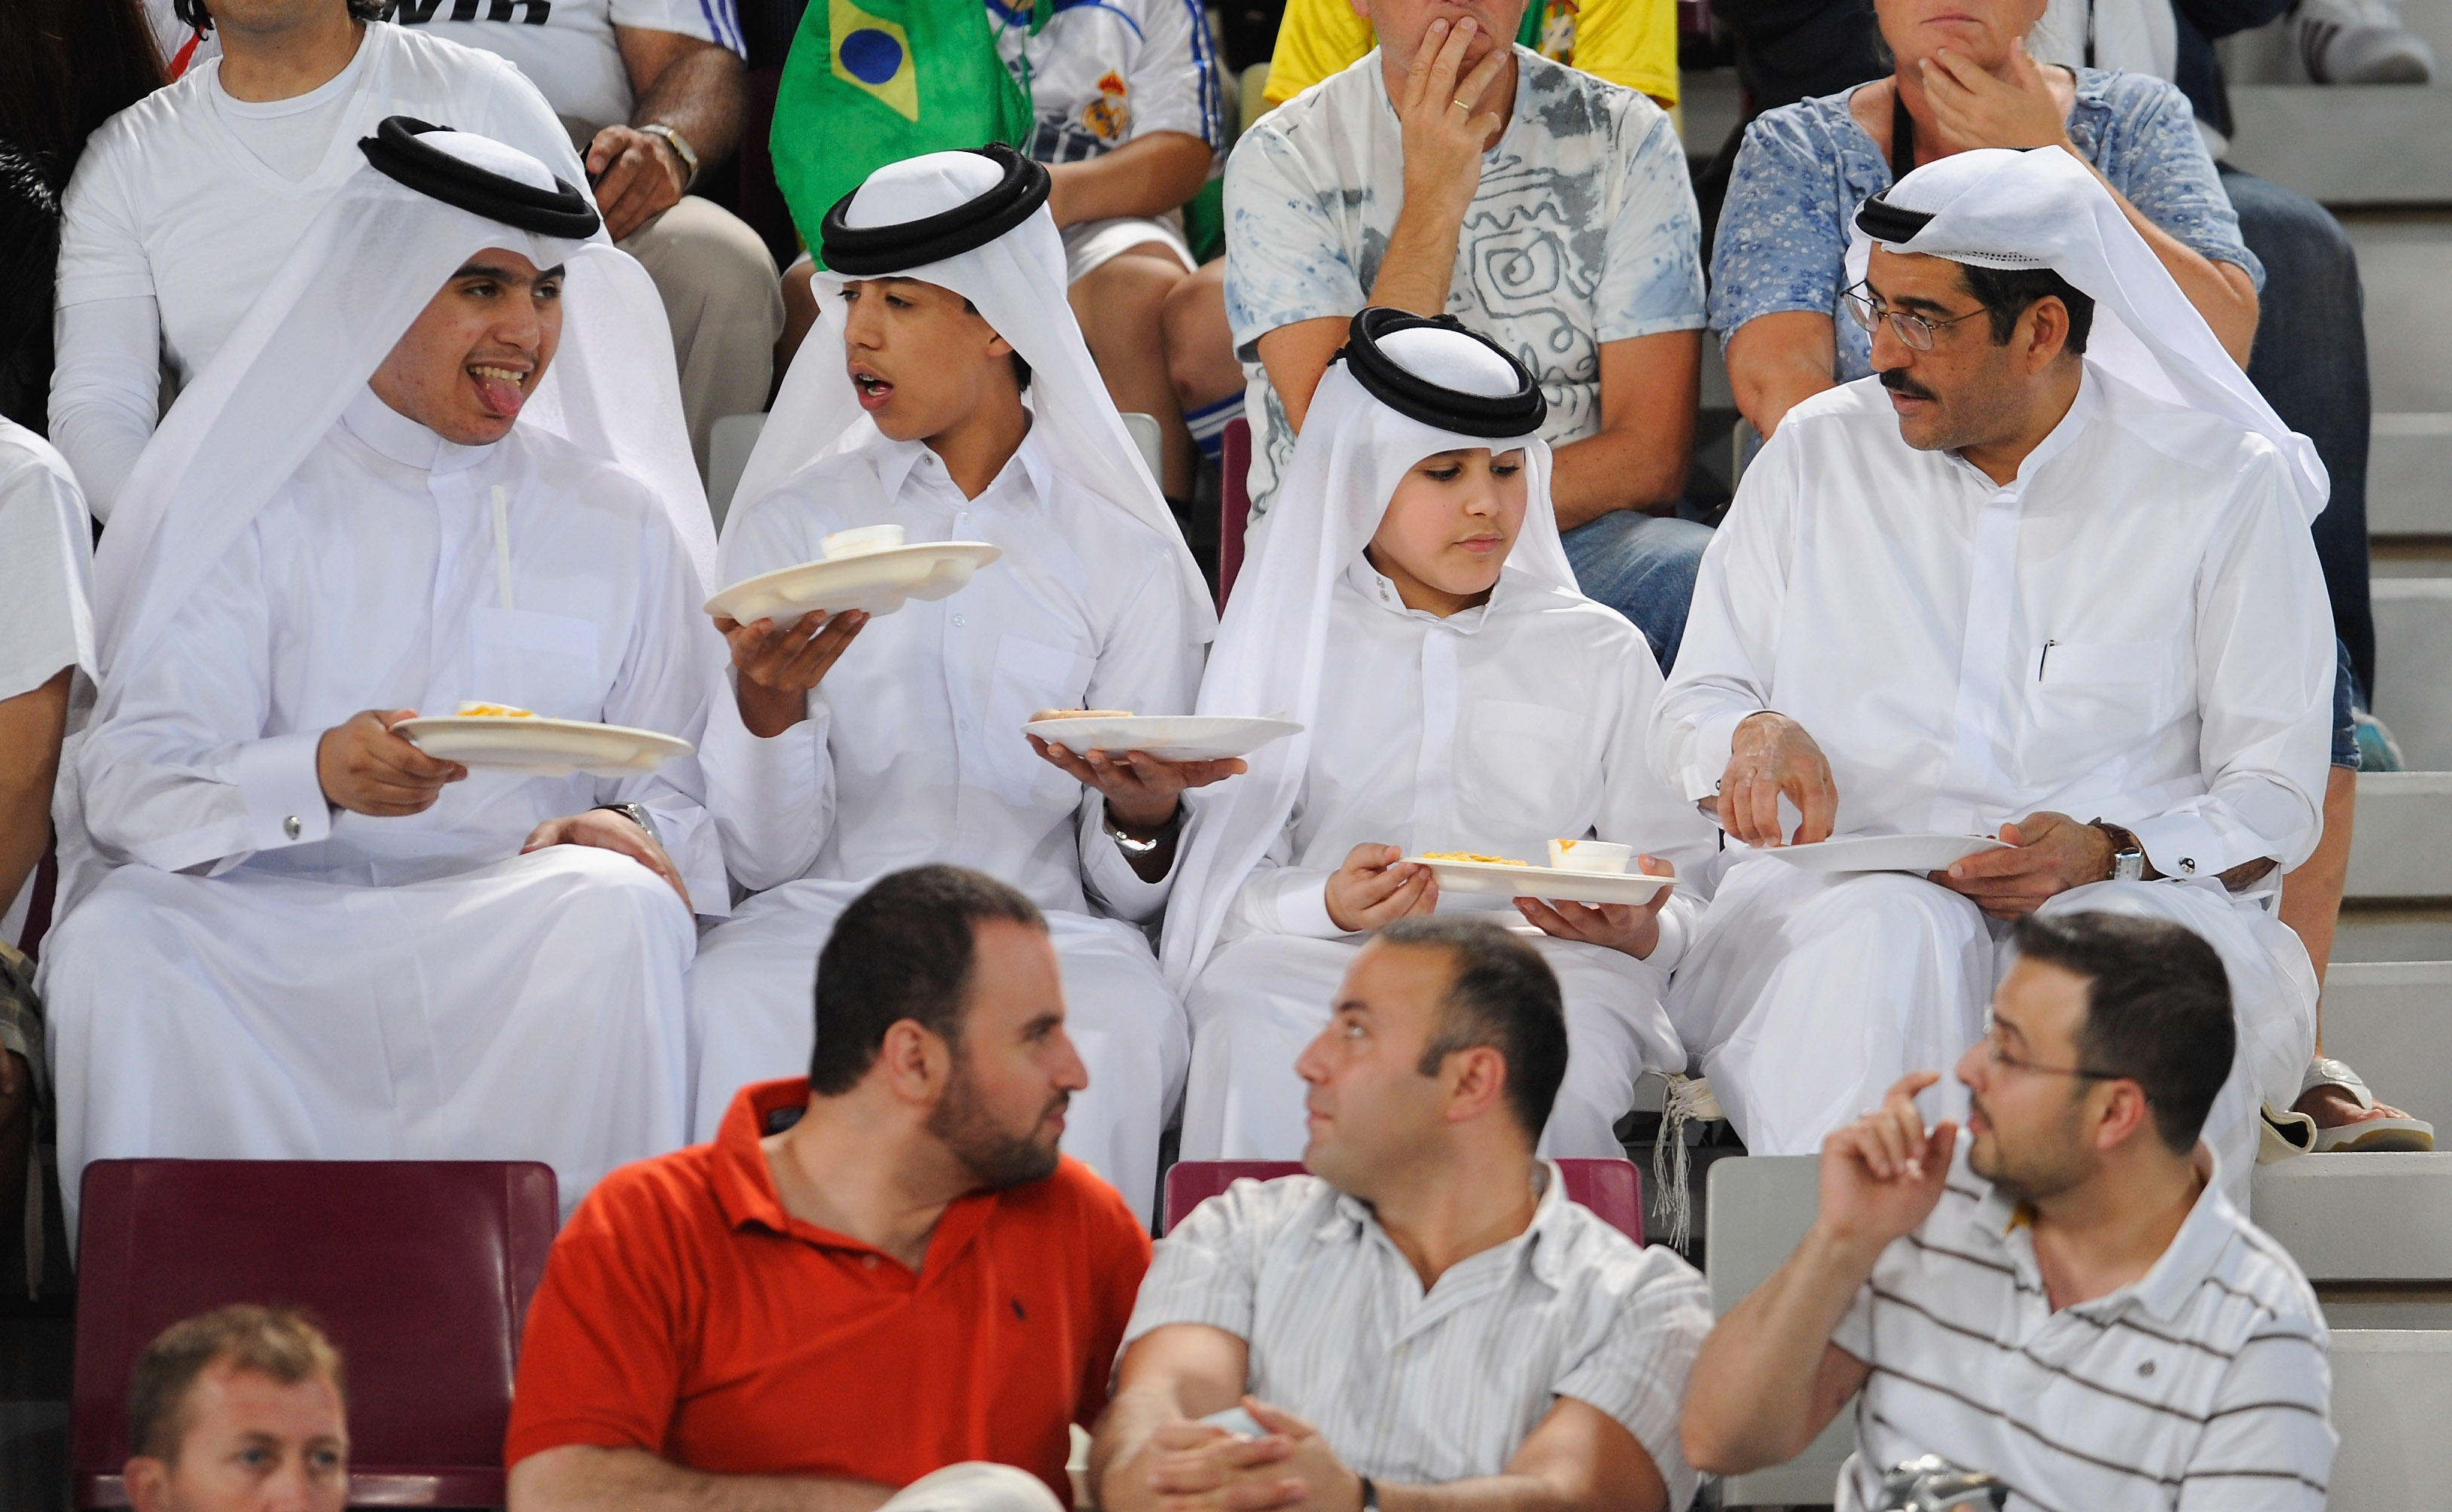 DOHA, QATAR - NOVEMBER 14: Local fans during the International Friendly match between Brazil and England at the Khalifa Stadium on November 14, 2009 in Doha, Qatar.  (Photo by Michael Regan/Getty Images)